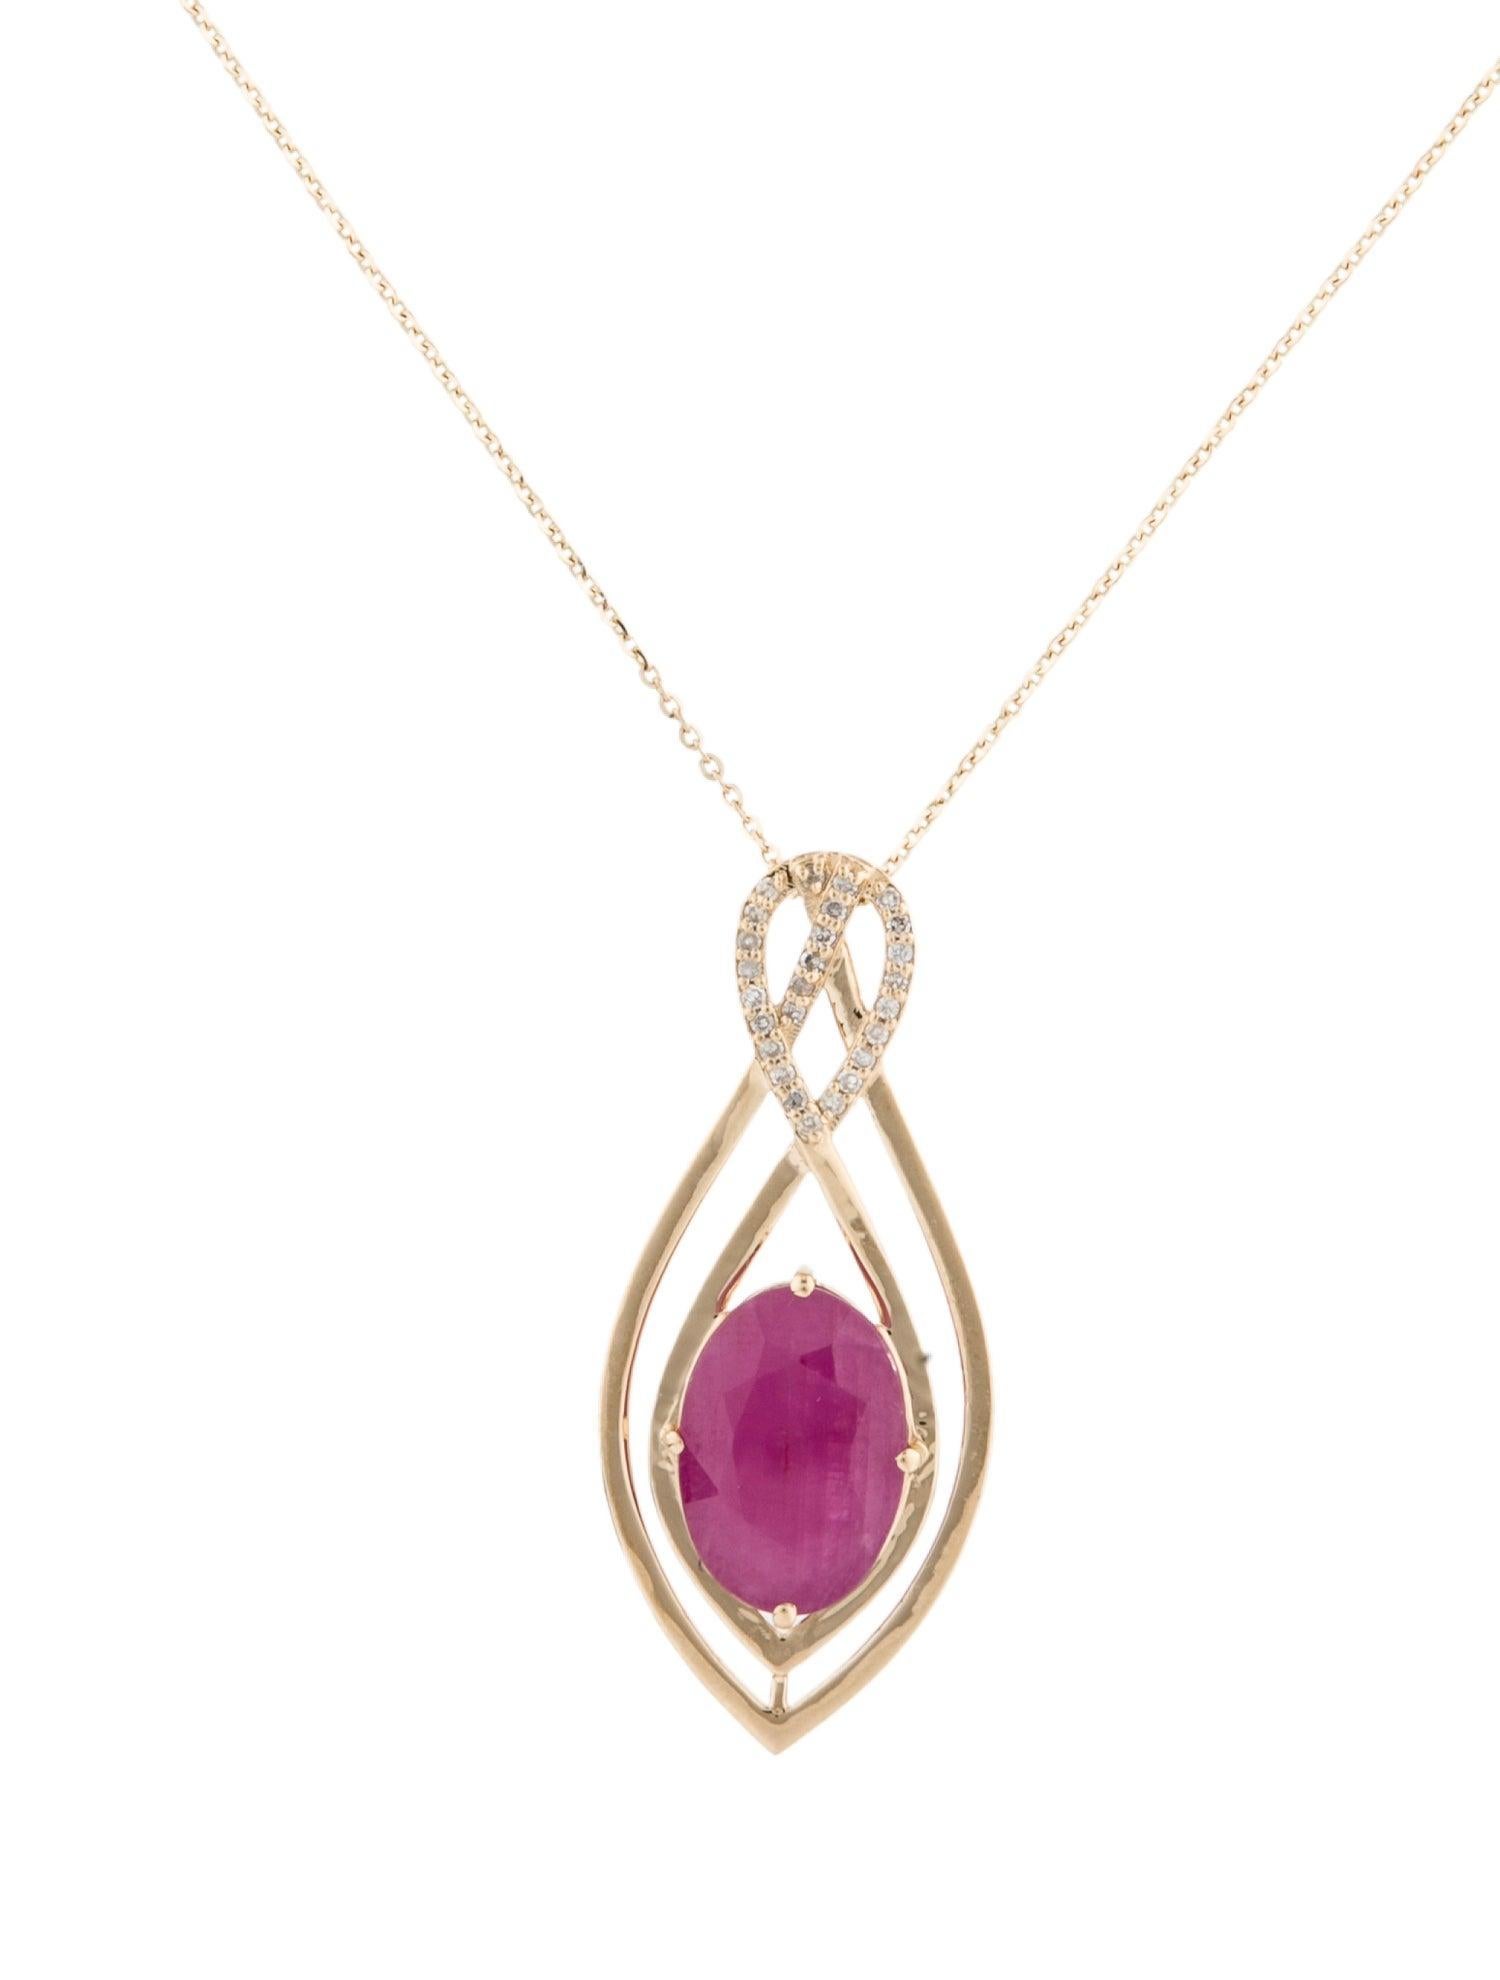 Exquisite 14K Ruby & Diamond Pendant Necklace  4.07ct Gemstone Sparkle In New Condition For Sale In Holtsville, NY